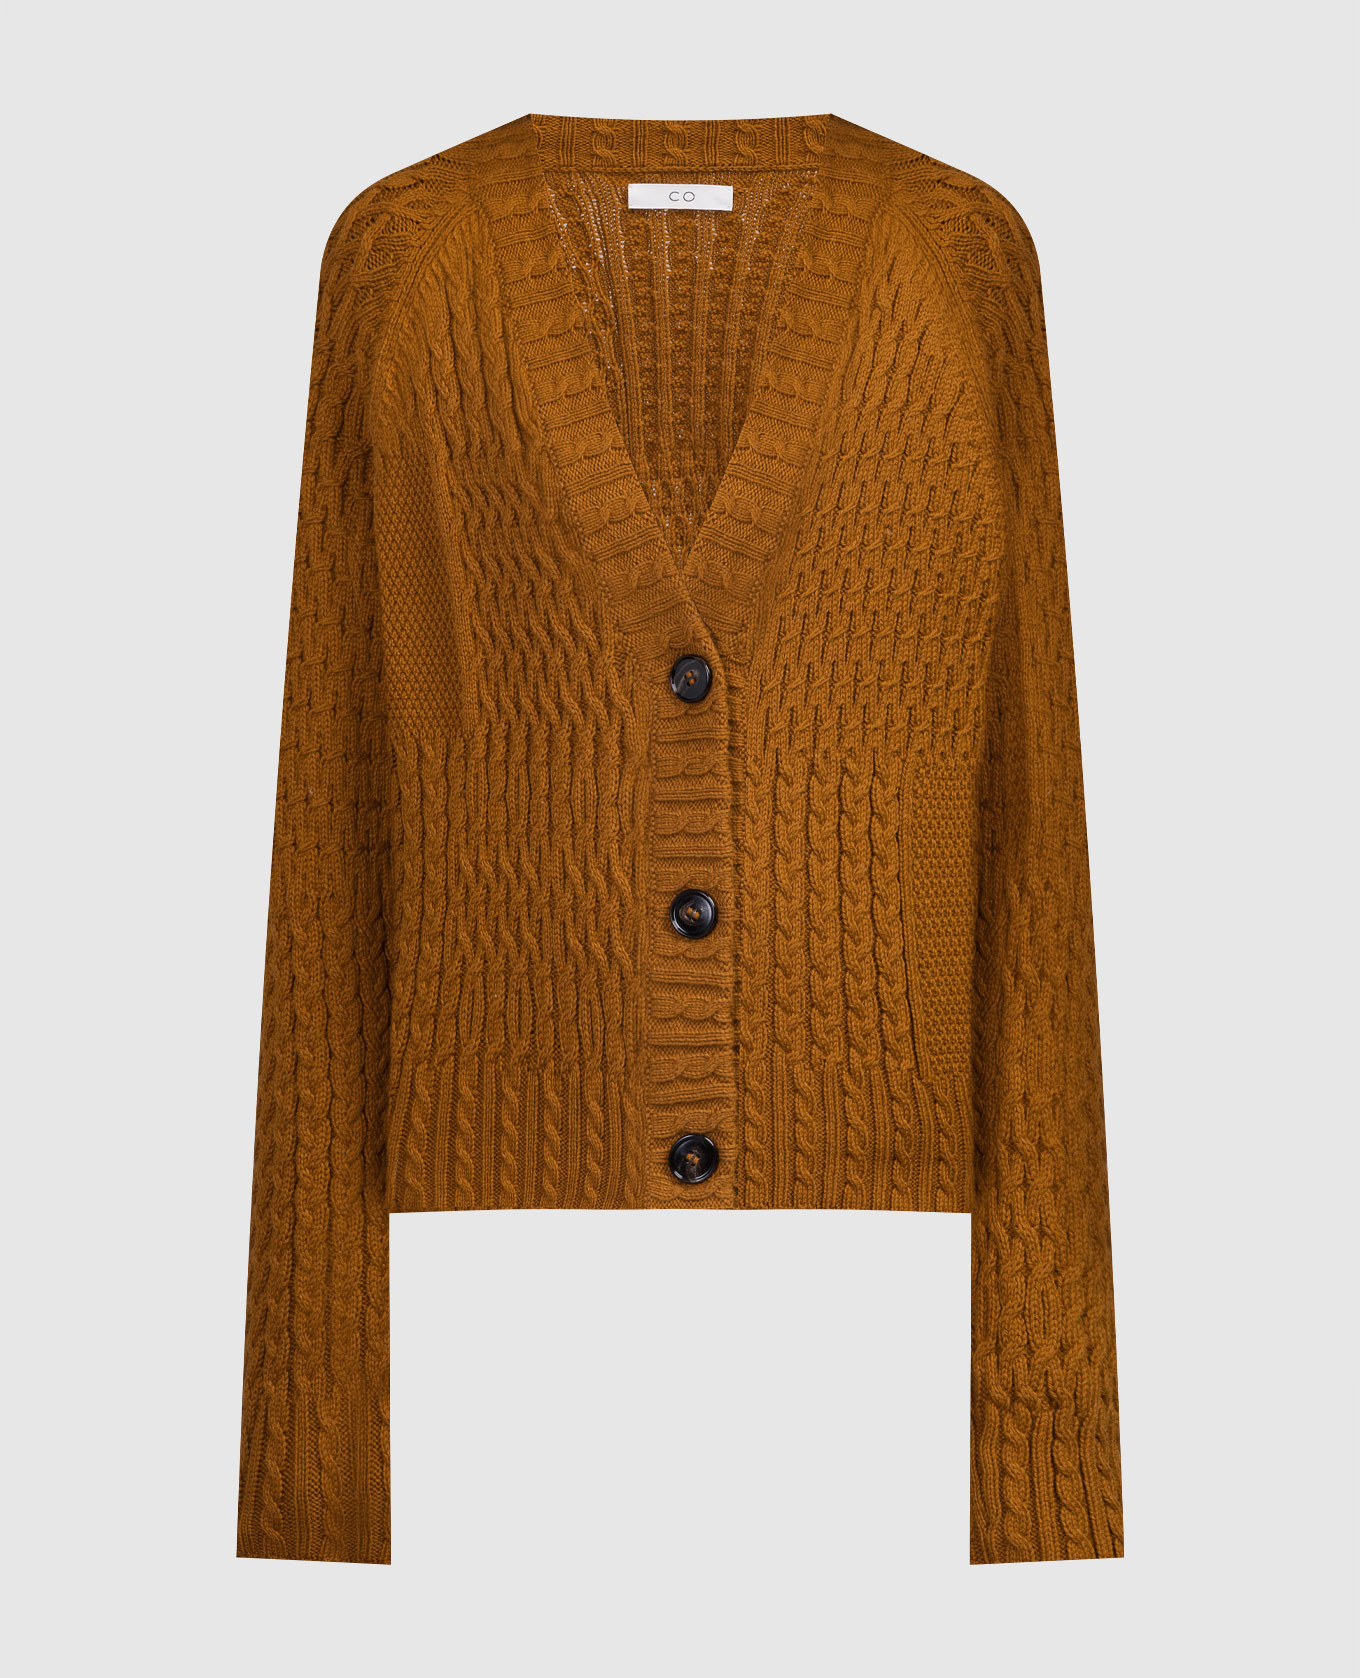 Brown cardigan with textured pattern